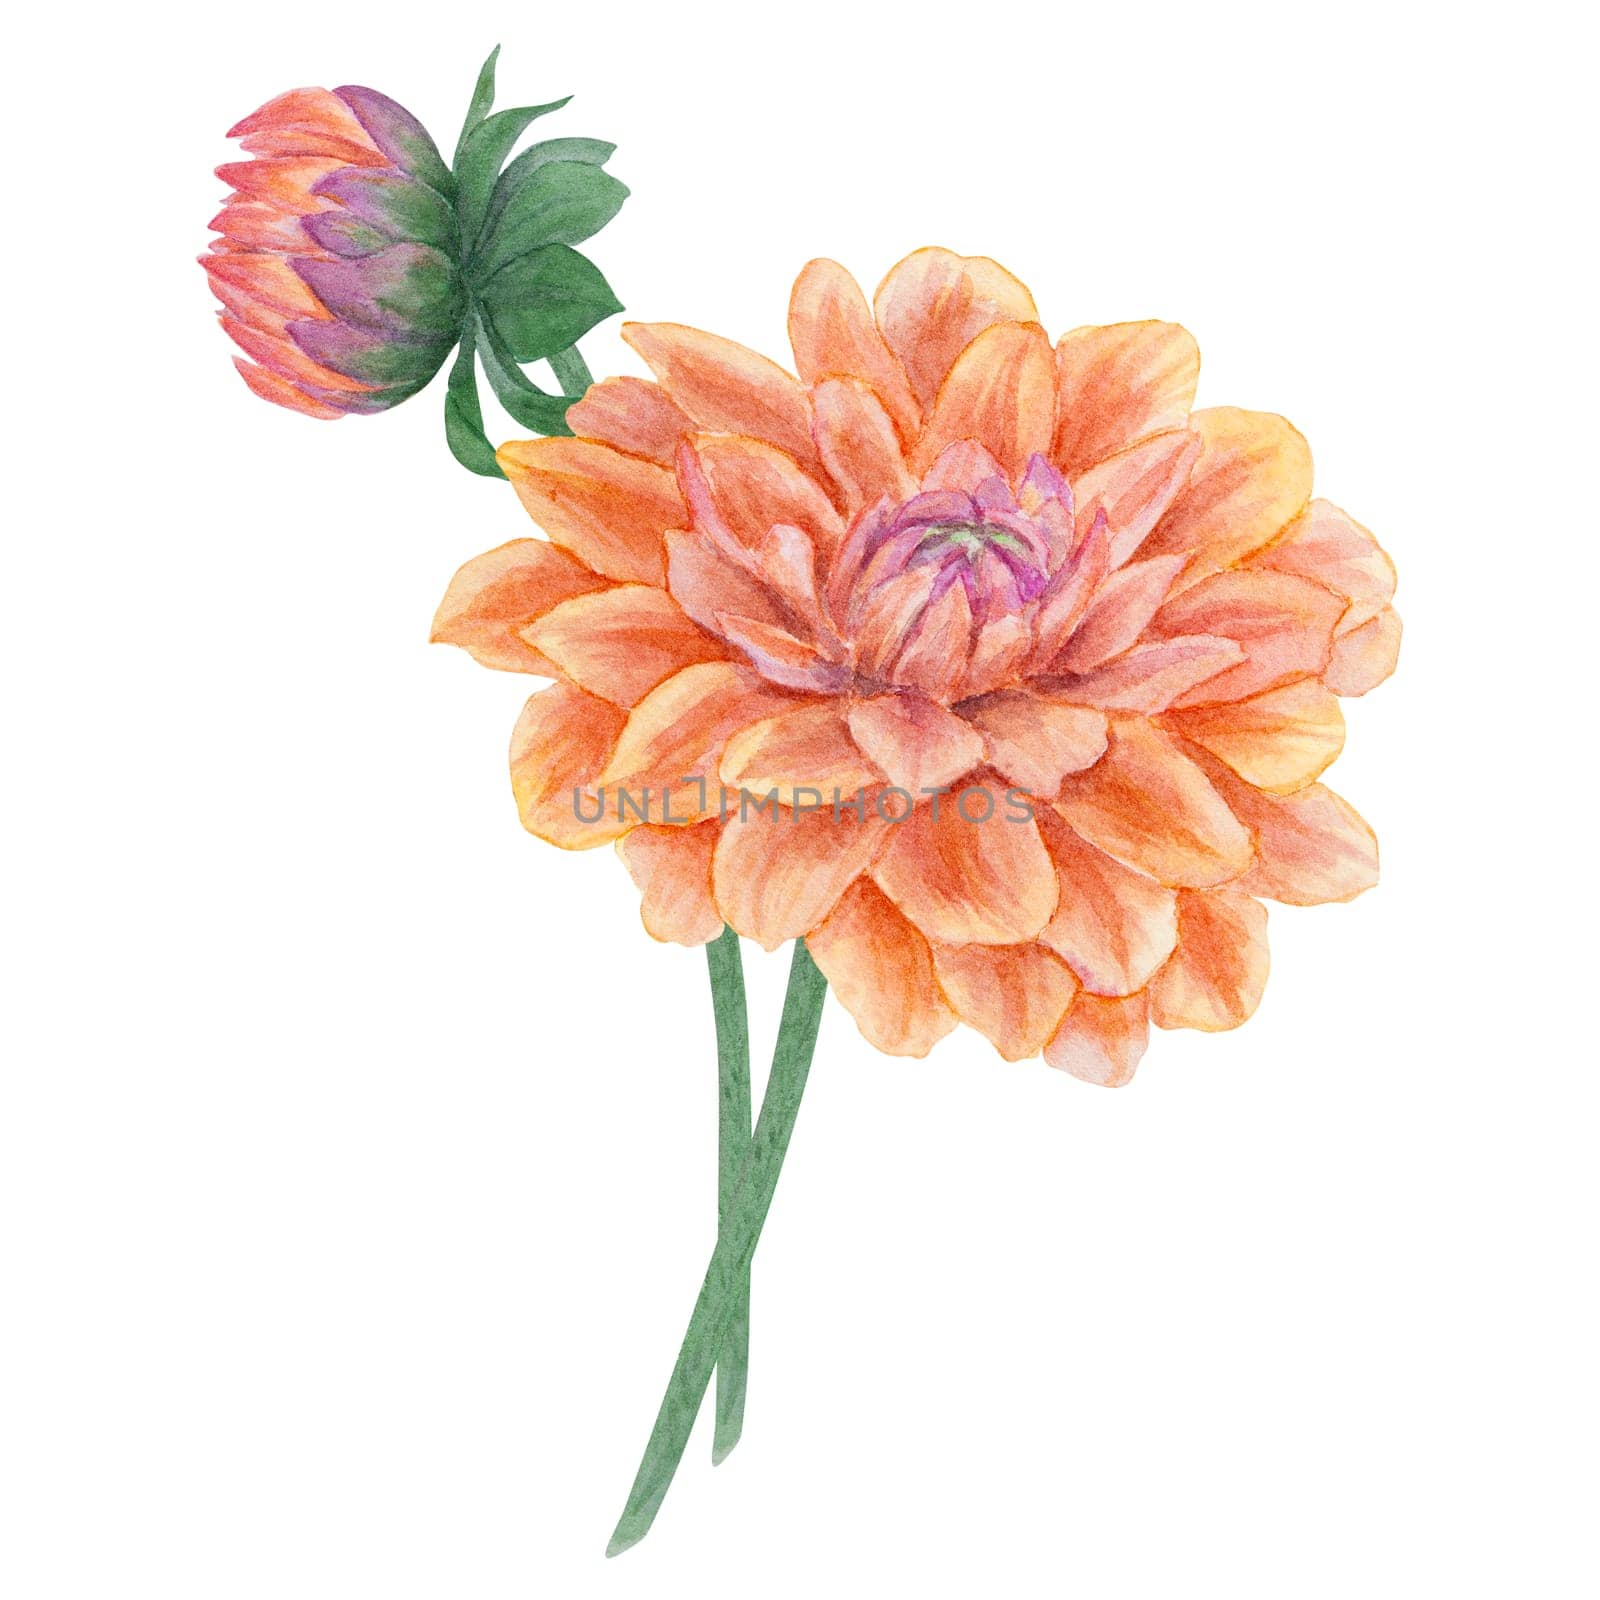 Orange dahlia watercolor illustration. Hand drawn botanical painting, floral sketch. Colorful flower clipart for summer or autumn design of wedding invitation, prints, greetings, sublimation, textile by florainlove_art